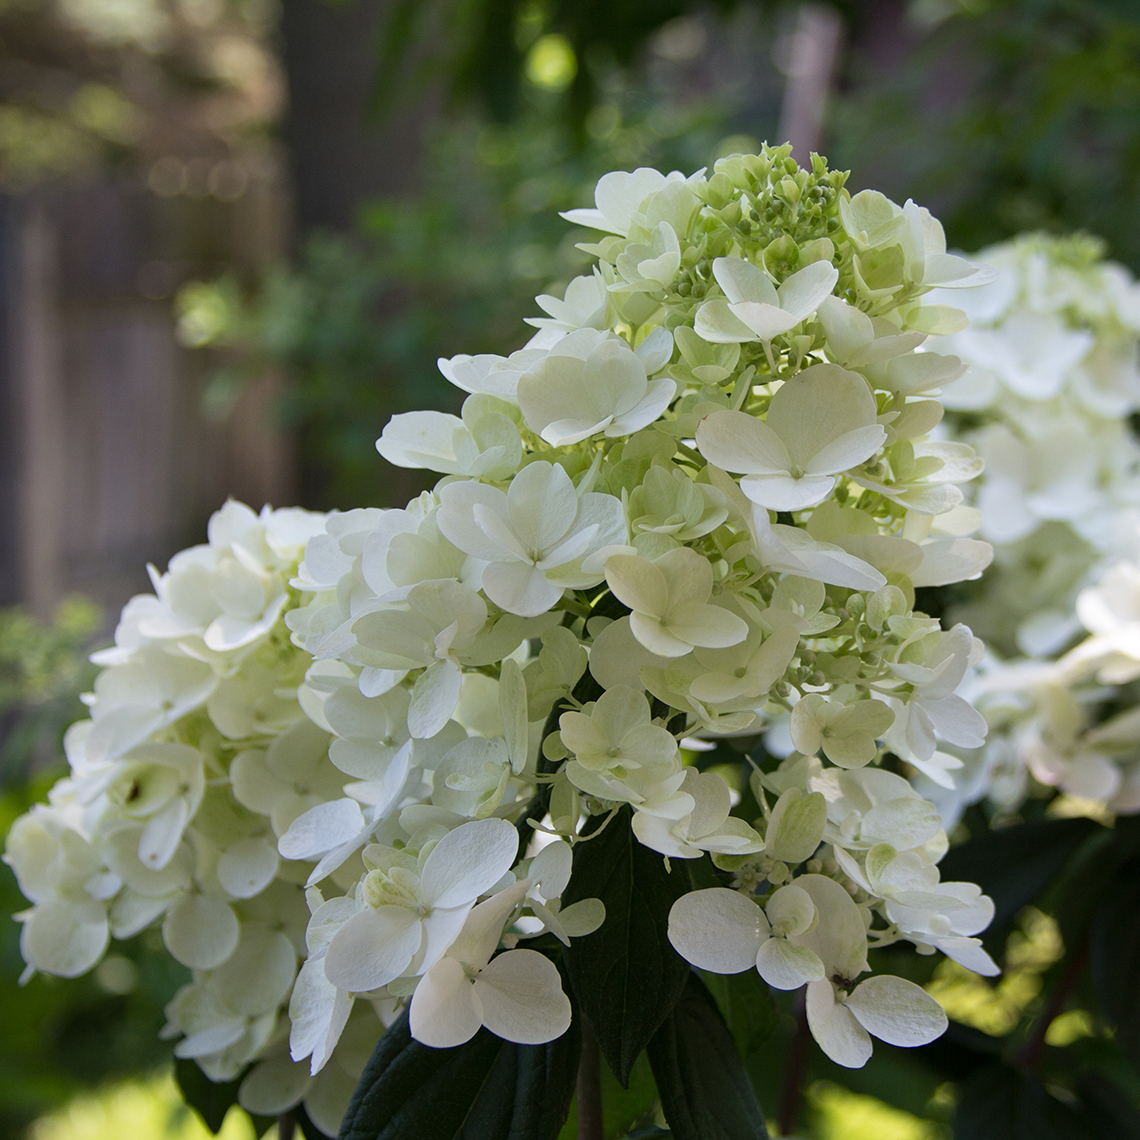 Closeup of the flowers of Fire Light panicle hydrangea in their white phase